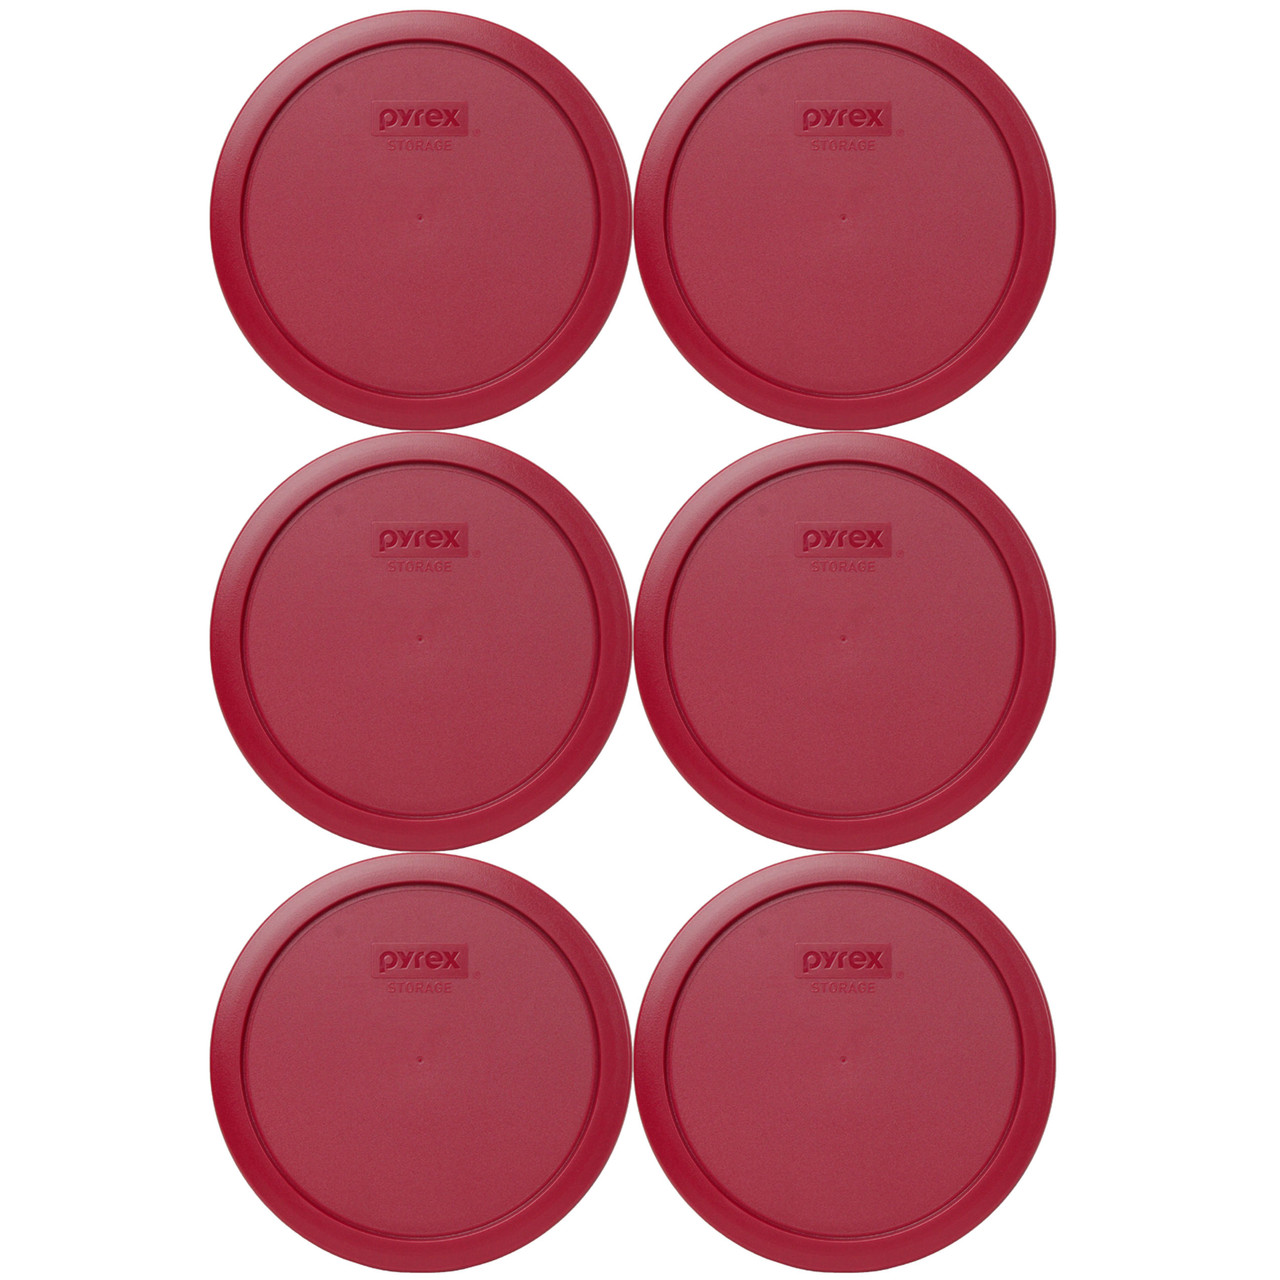 Pyrex 7203 7-Cup Round Glass Food Storage Bowl and 7402-PC Red